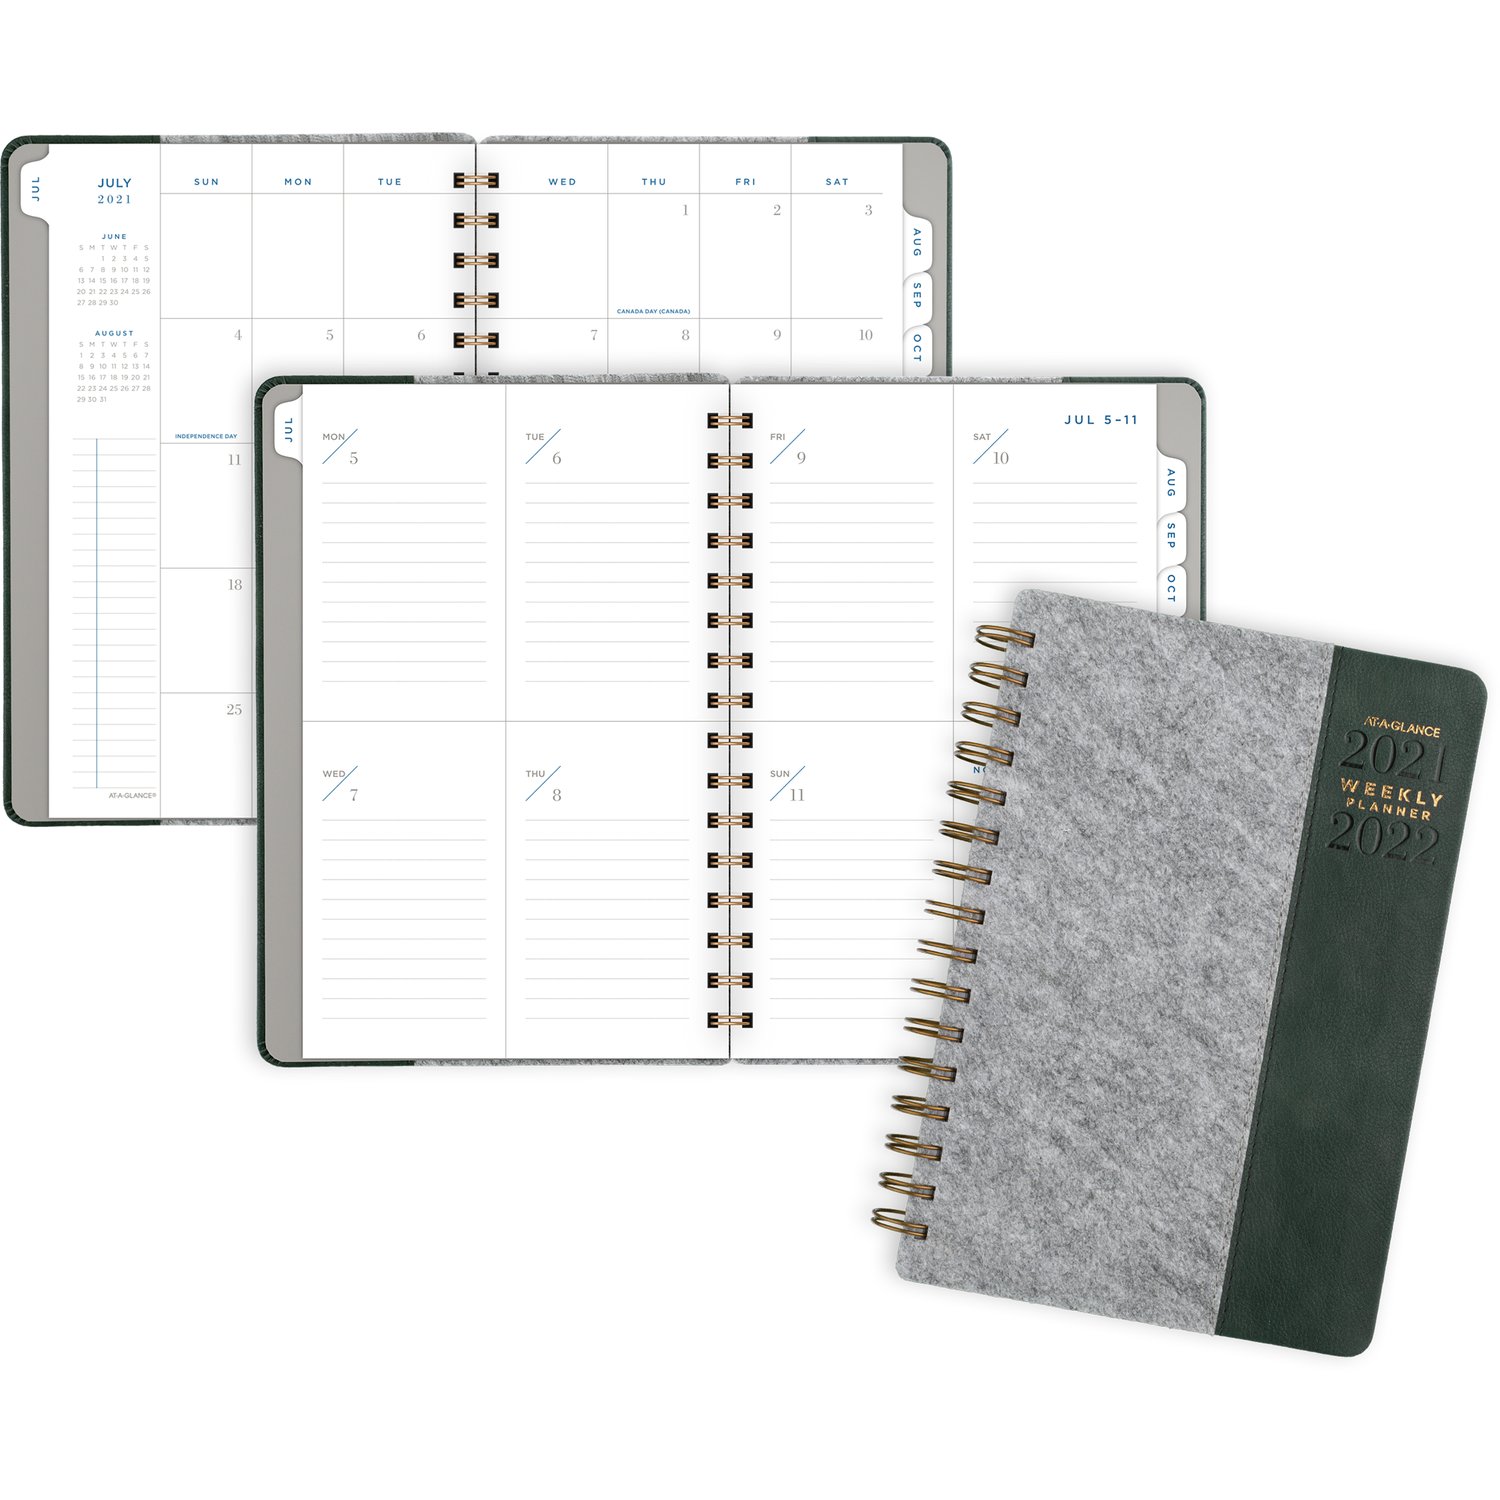 At A Glance Gray Academic Year 21-22 Planner 5x8